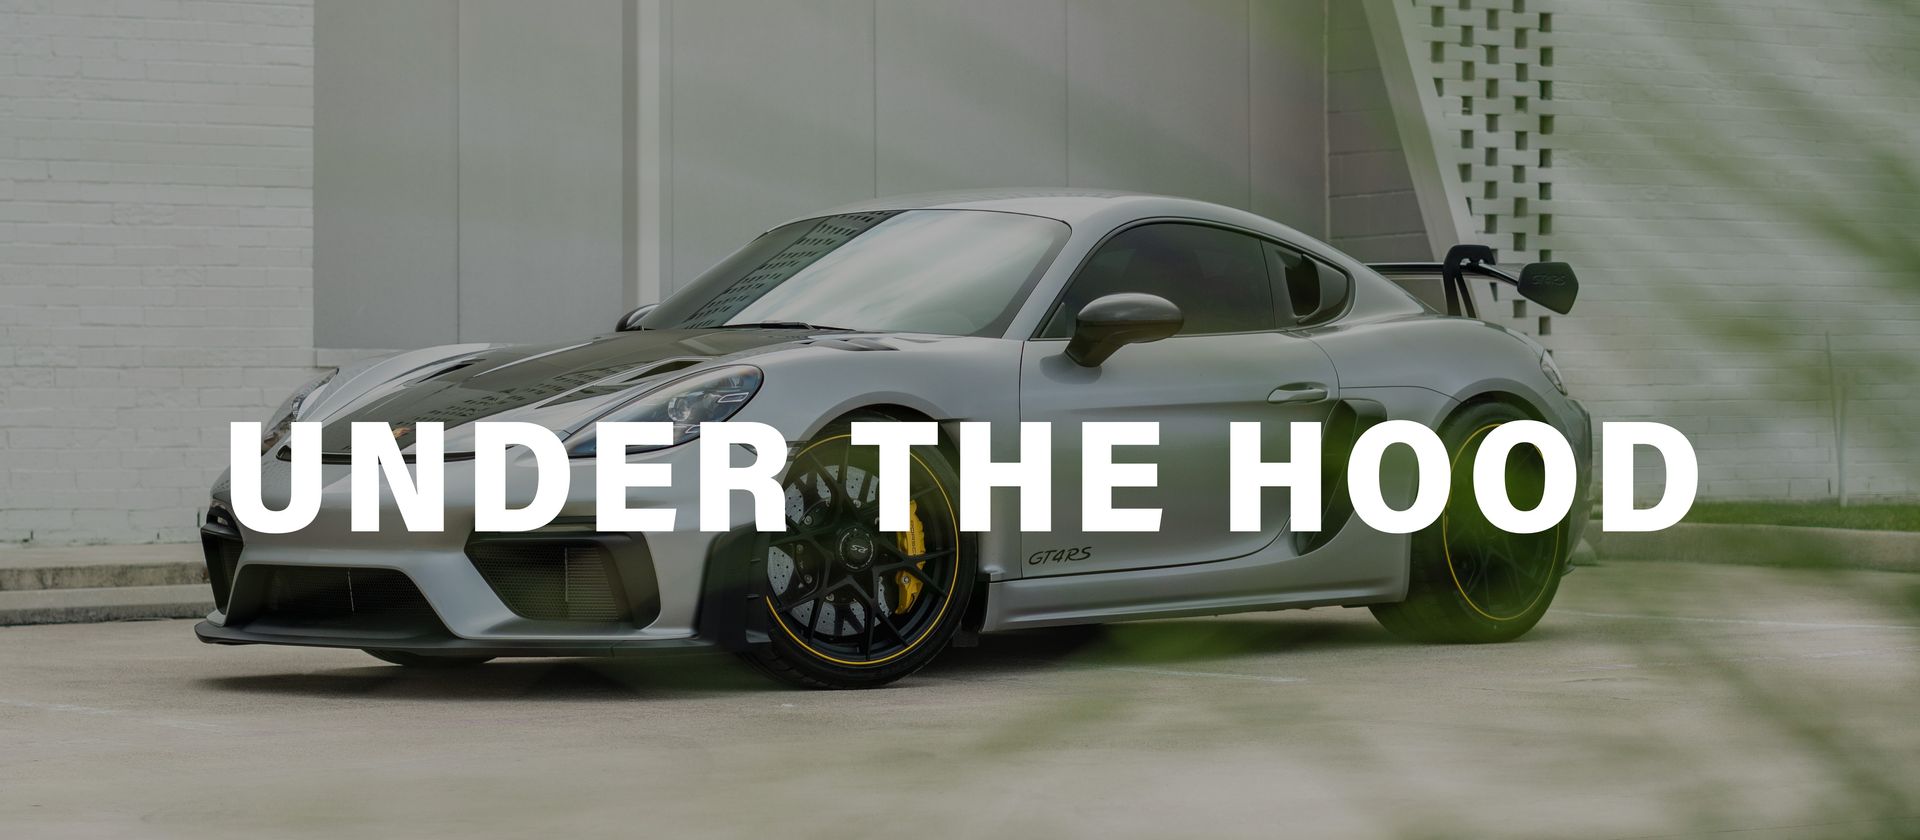 A white sports car is parked in front of a building with the words `` under the hood '' written on it.